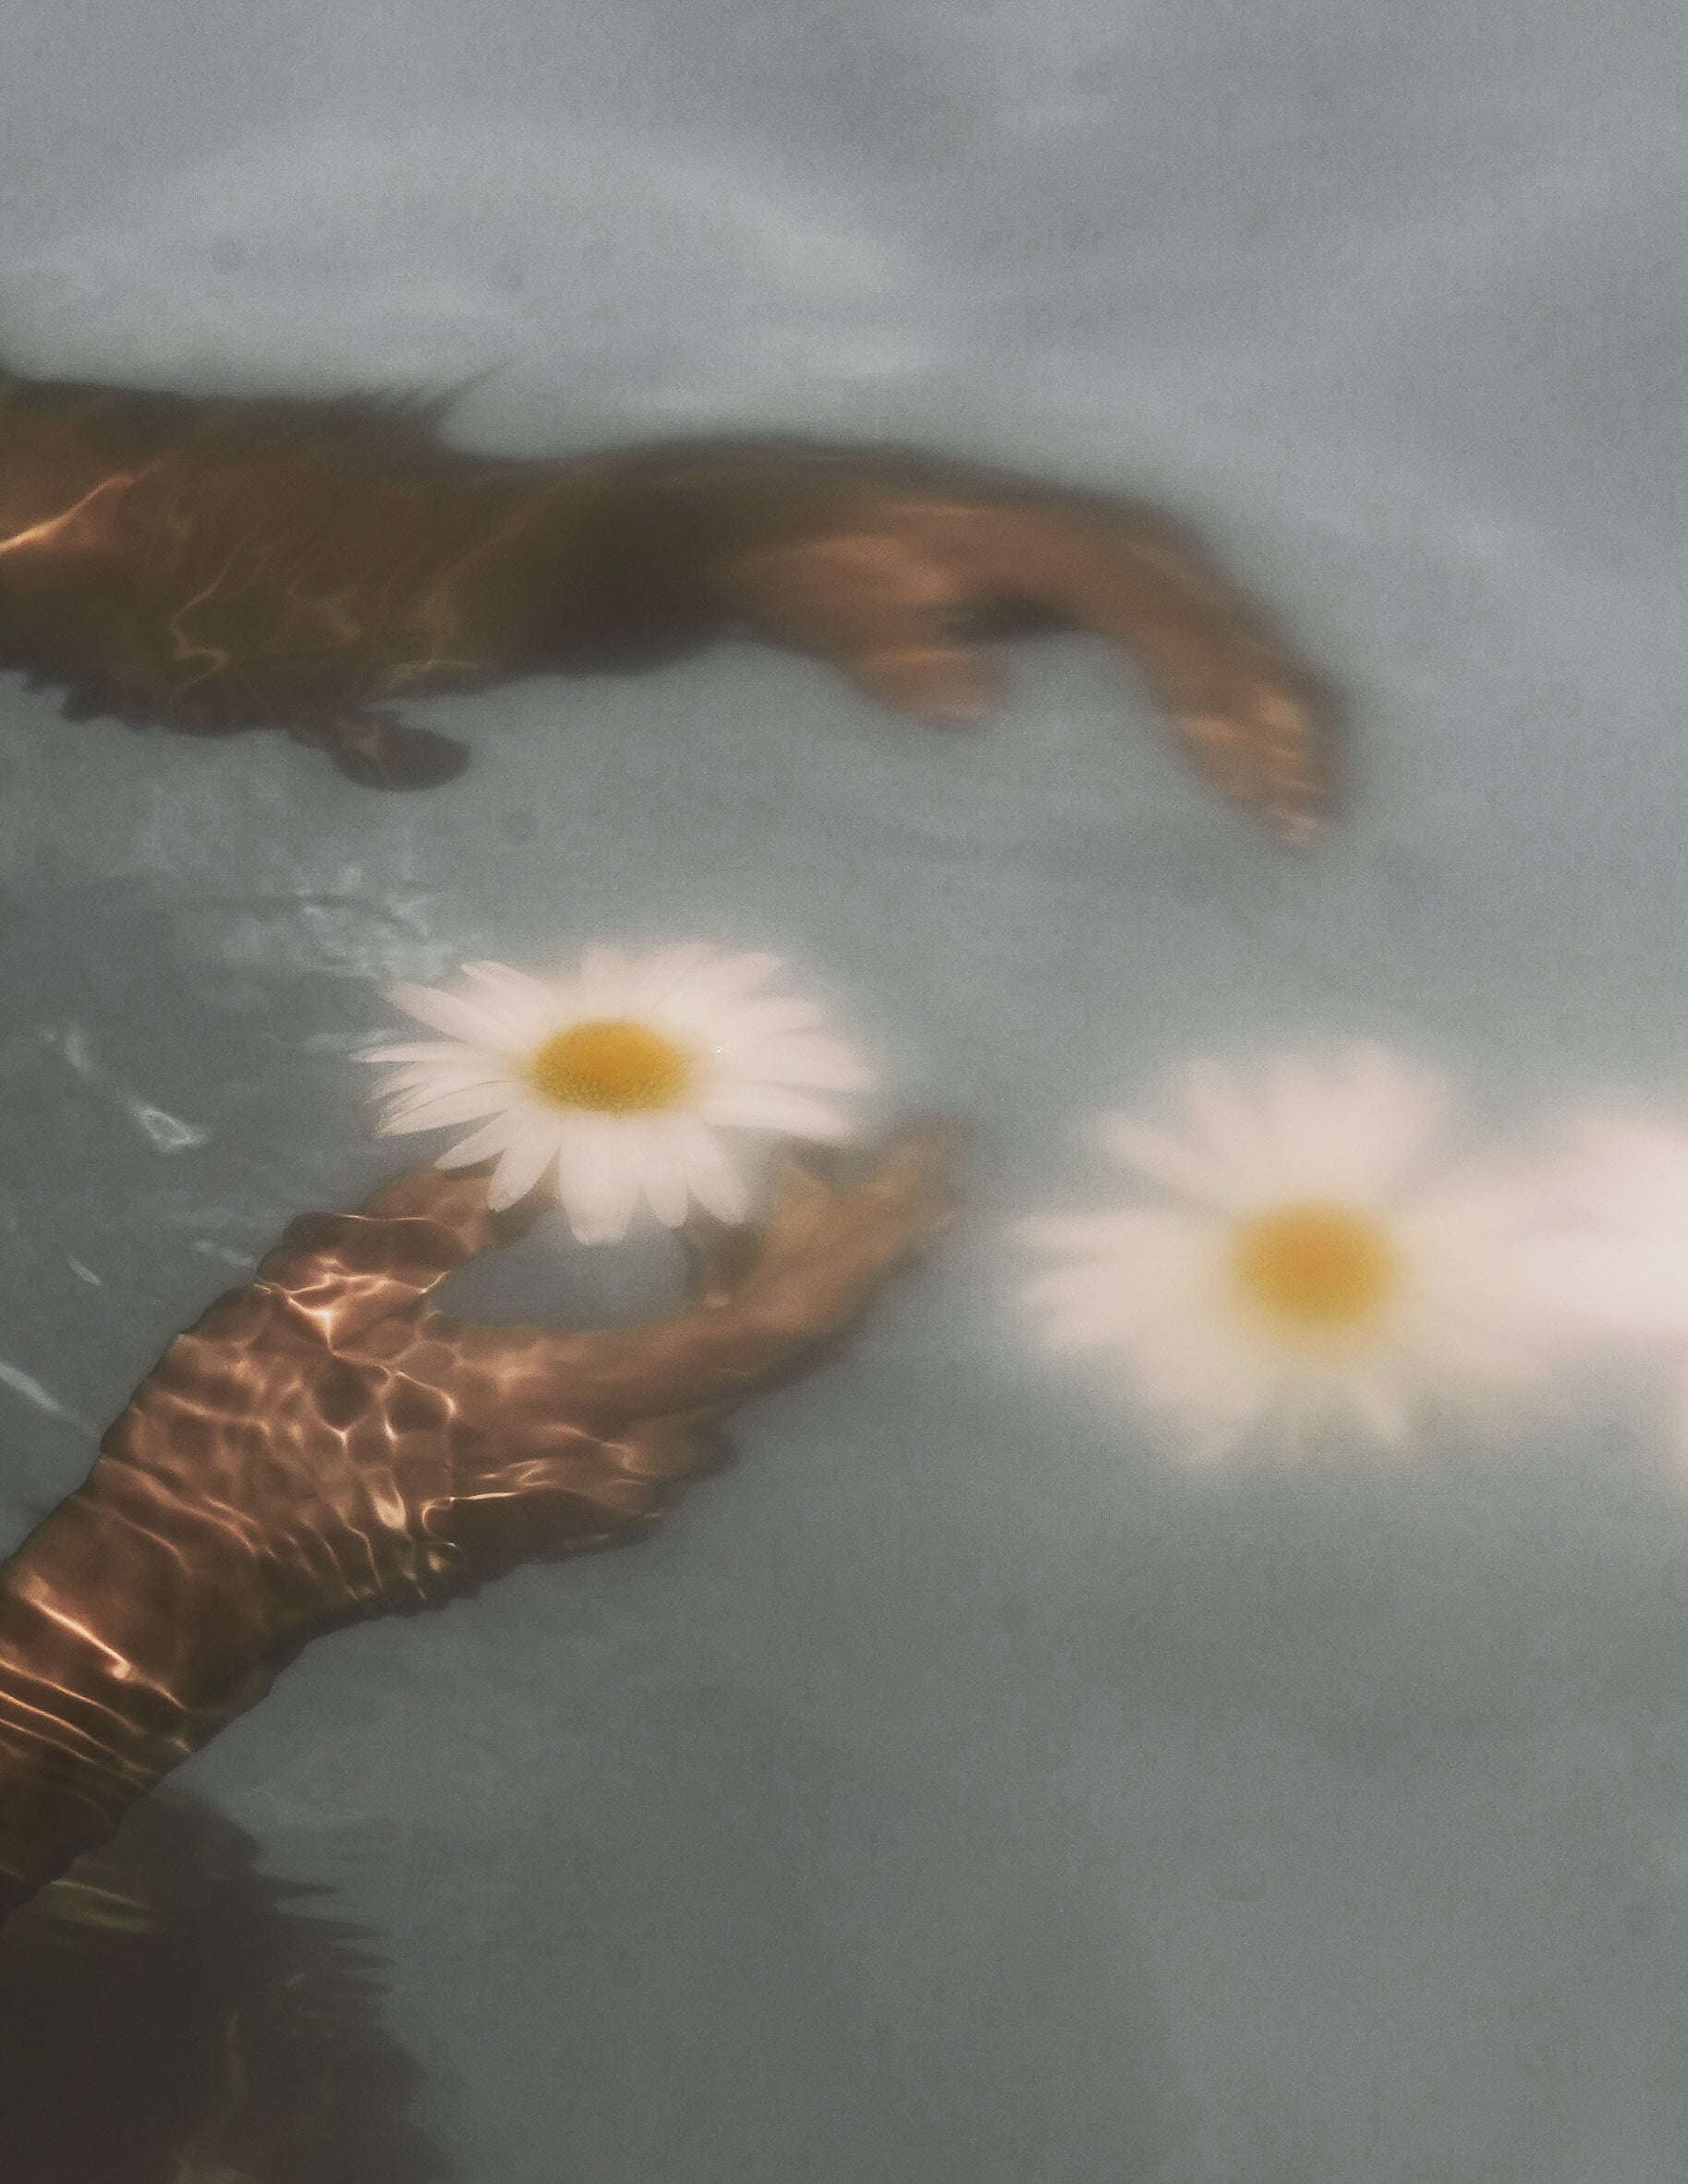 Daisies floating in water with hands